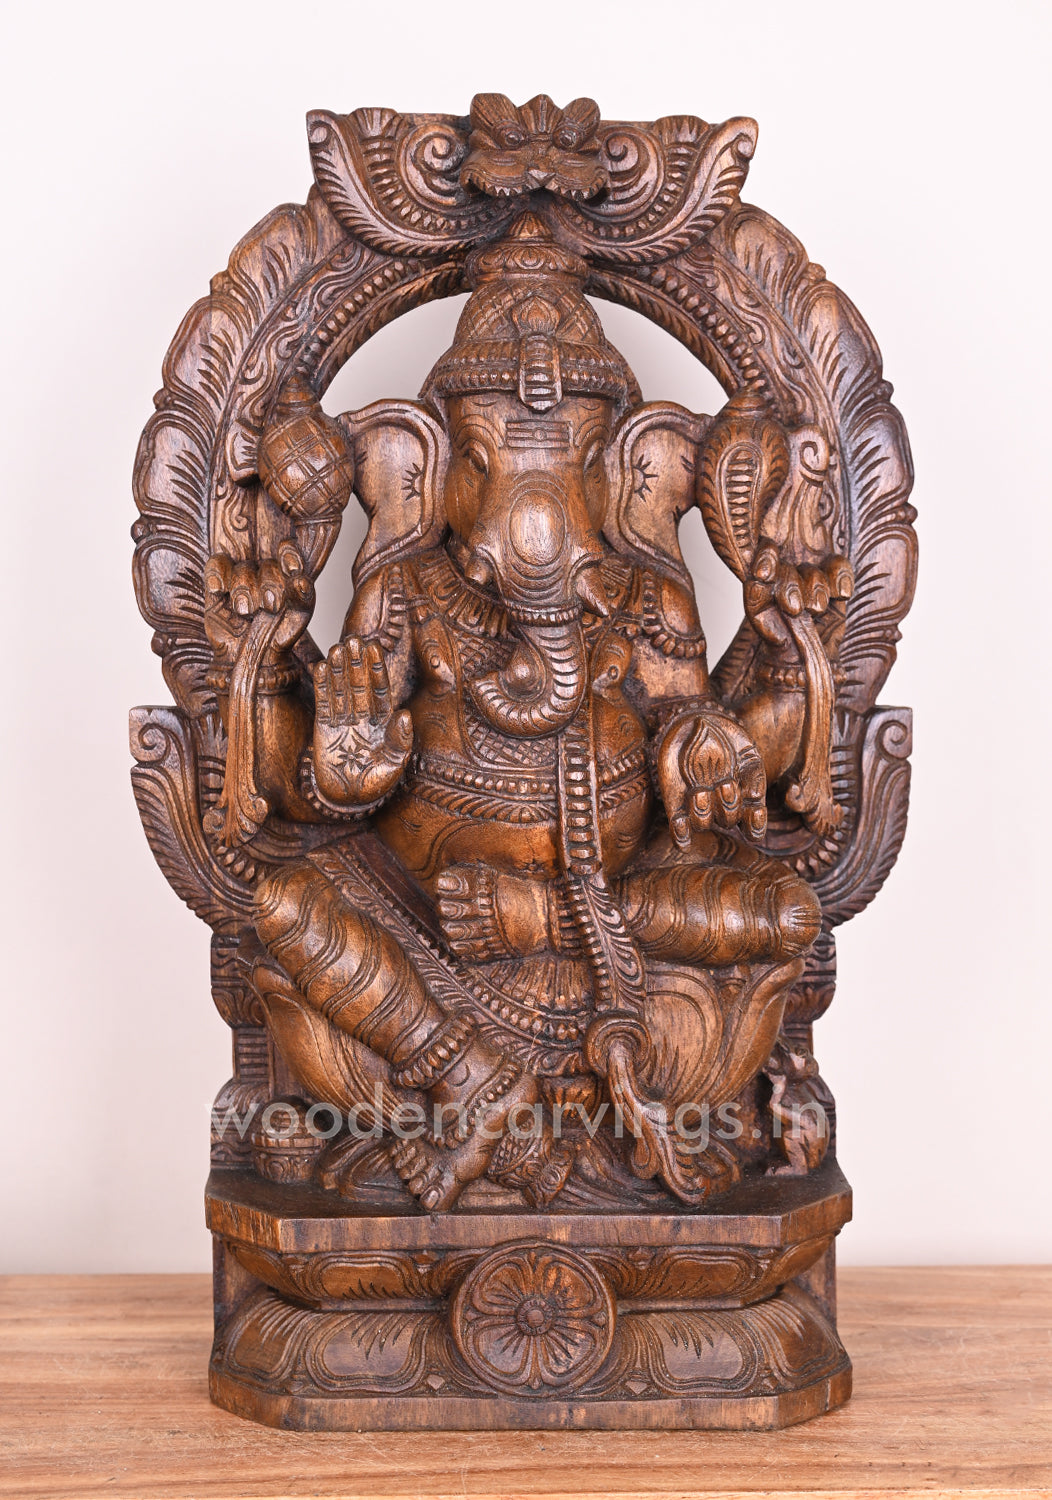 Arch Left Trunk Ganesha Blessing People in Mudra Abhaya on Lotus Wax Brown Wooden Sculpture 24"